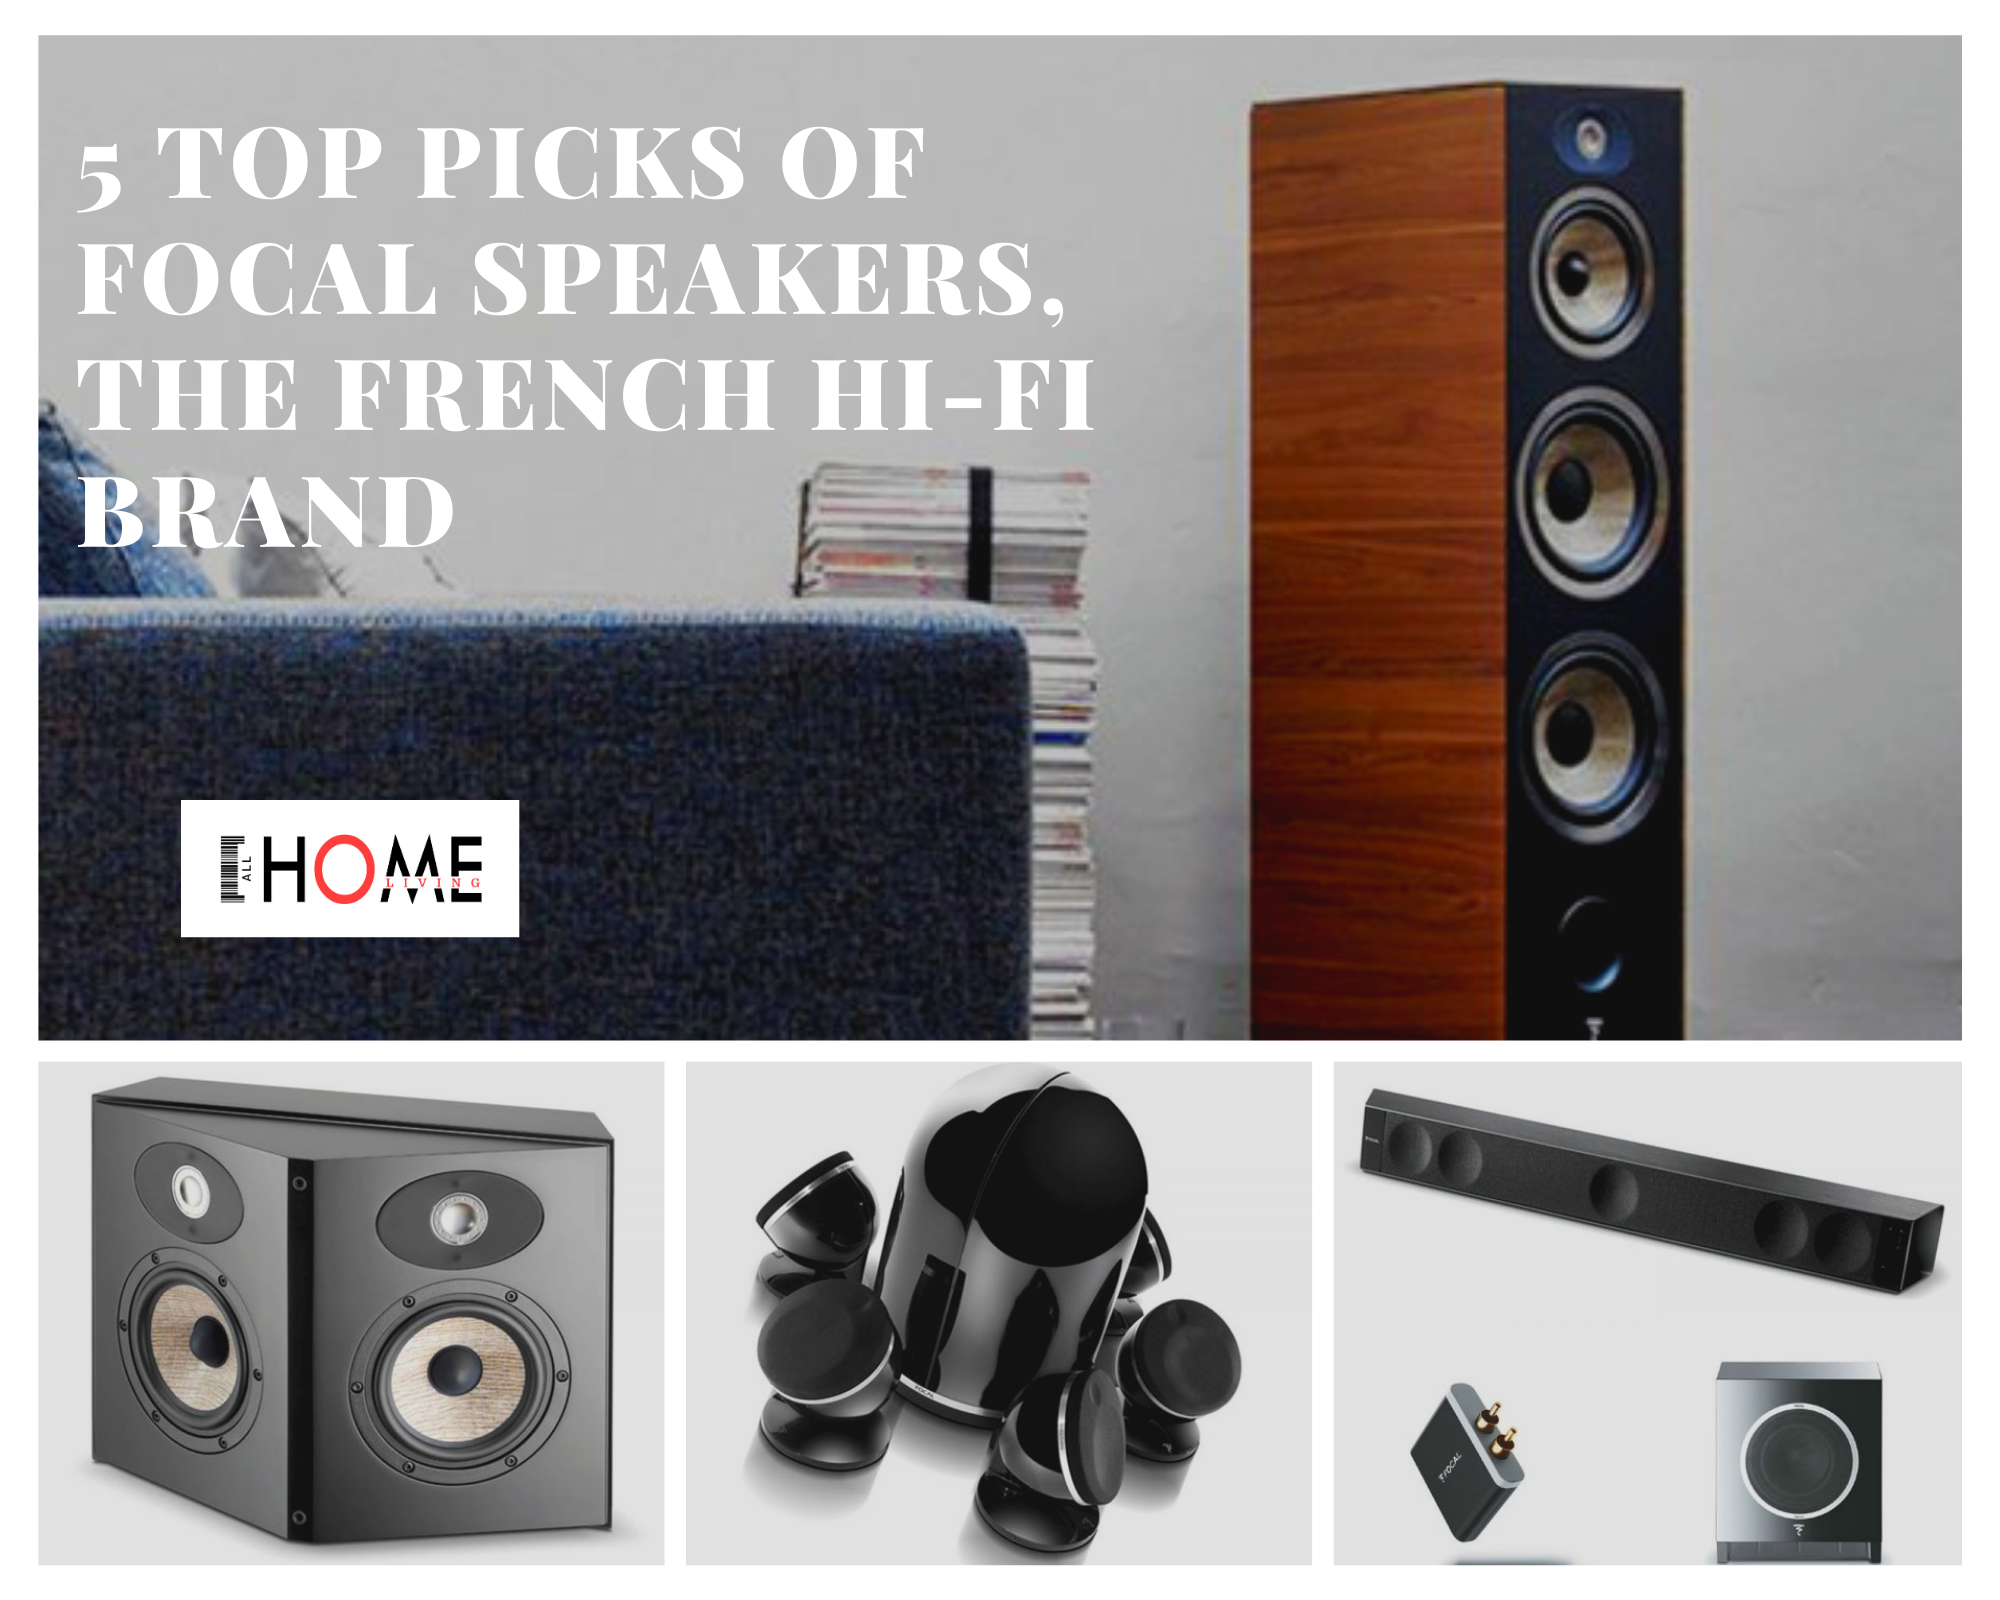 5 Top Picks of Focal Speakers, the French Hi-Fi Brand